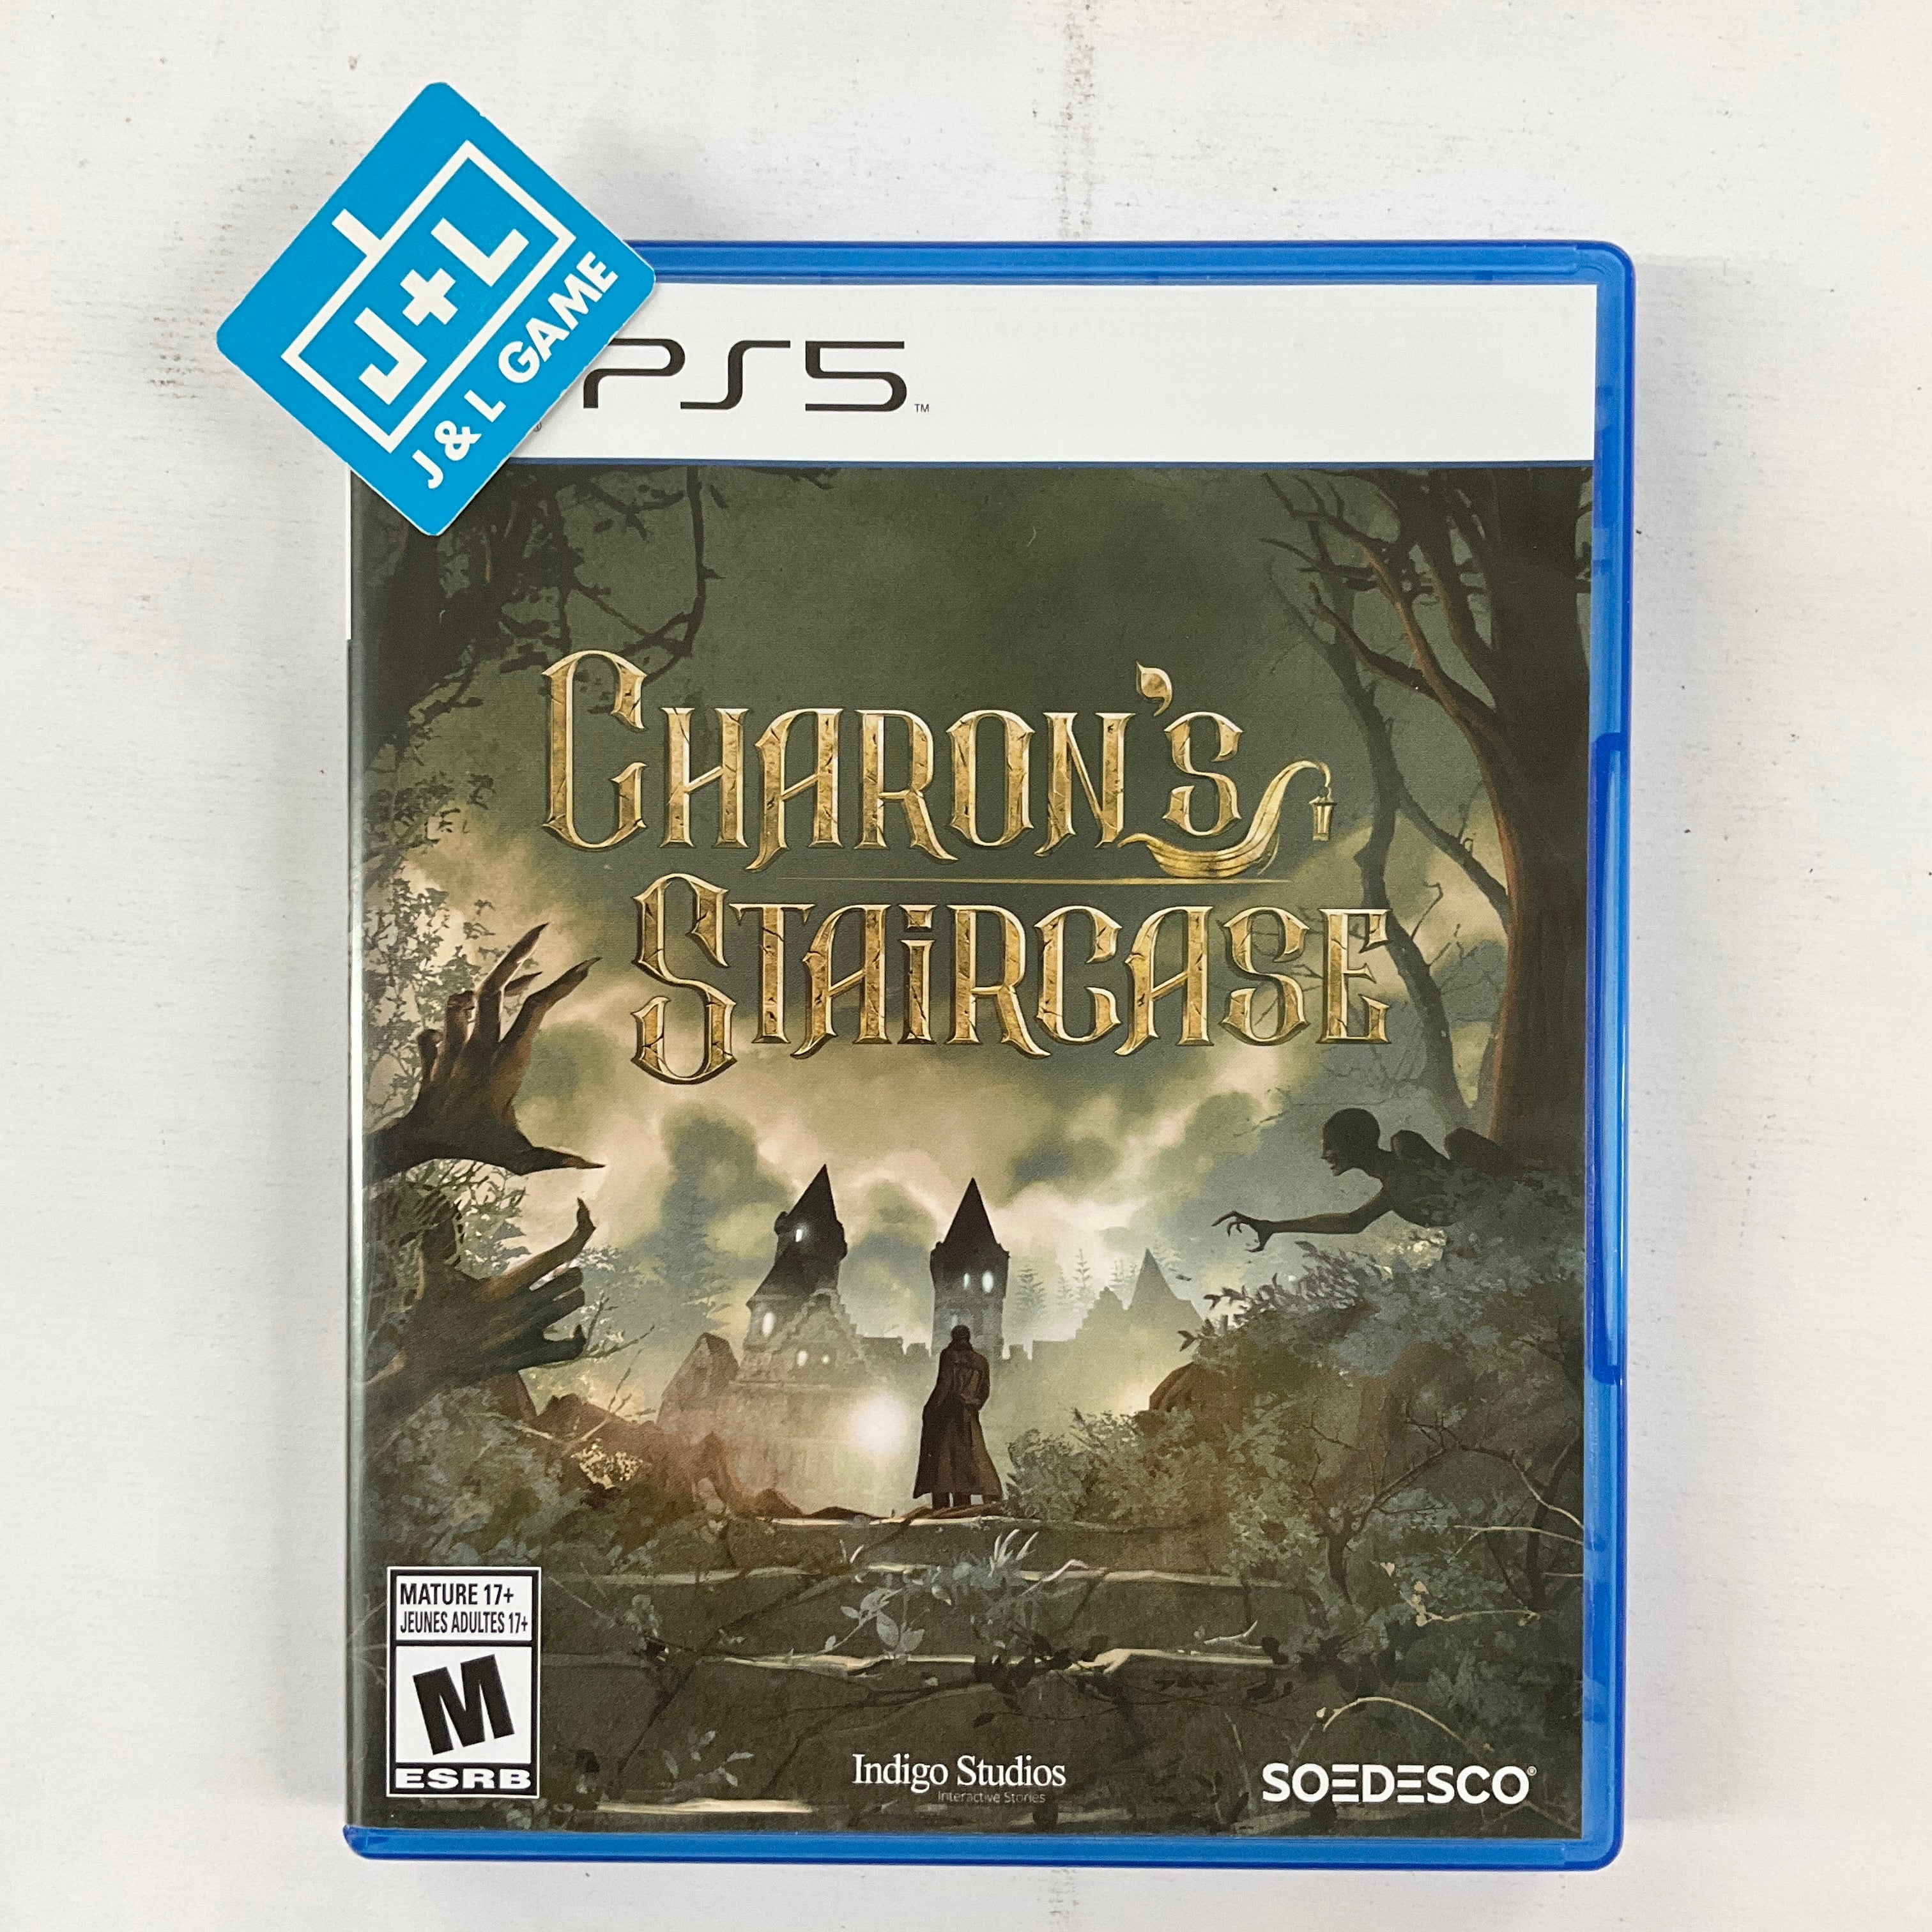 Charon's Staircase - (PS5) PlayStation 5 [UNBOXING] Video Games Soedesco   